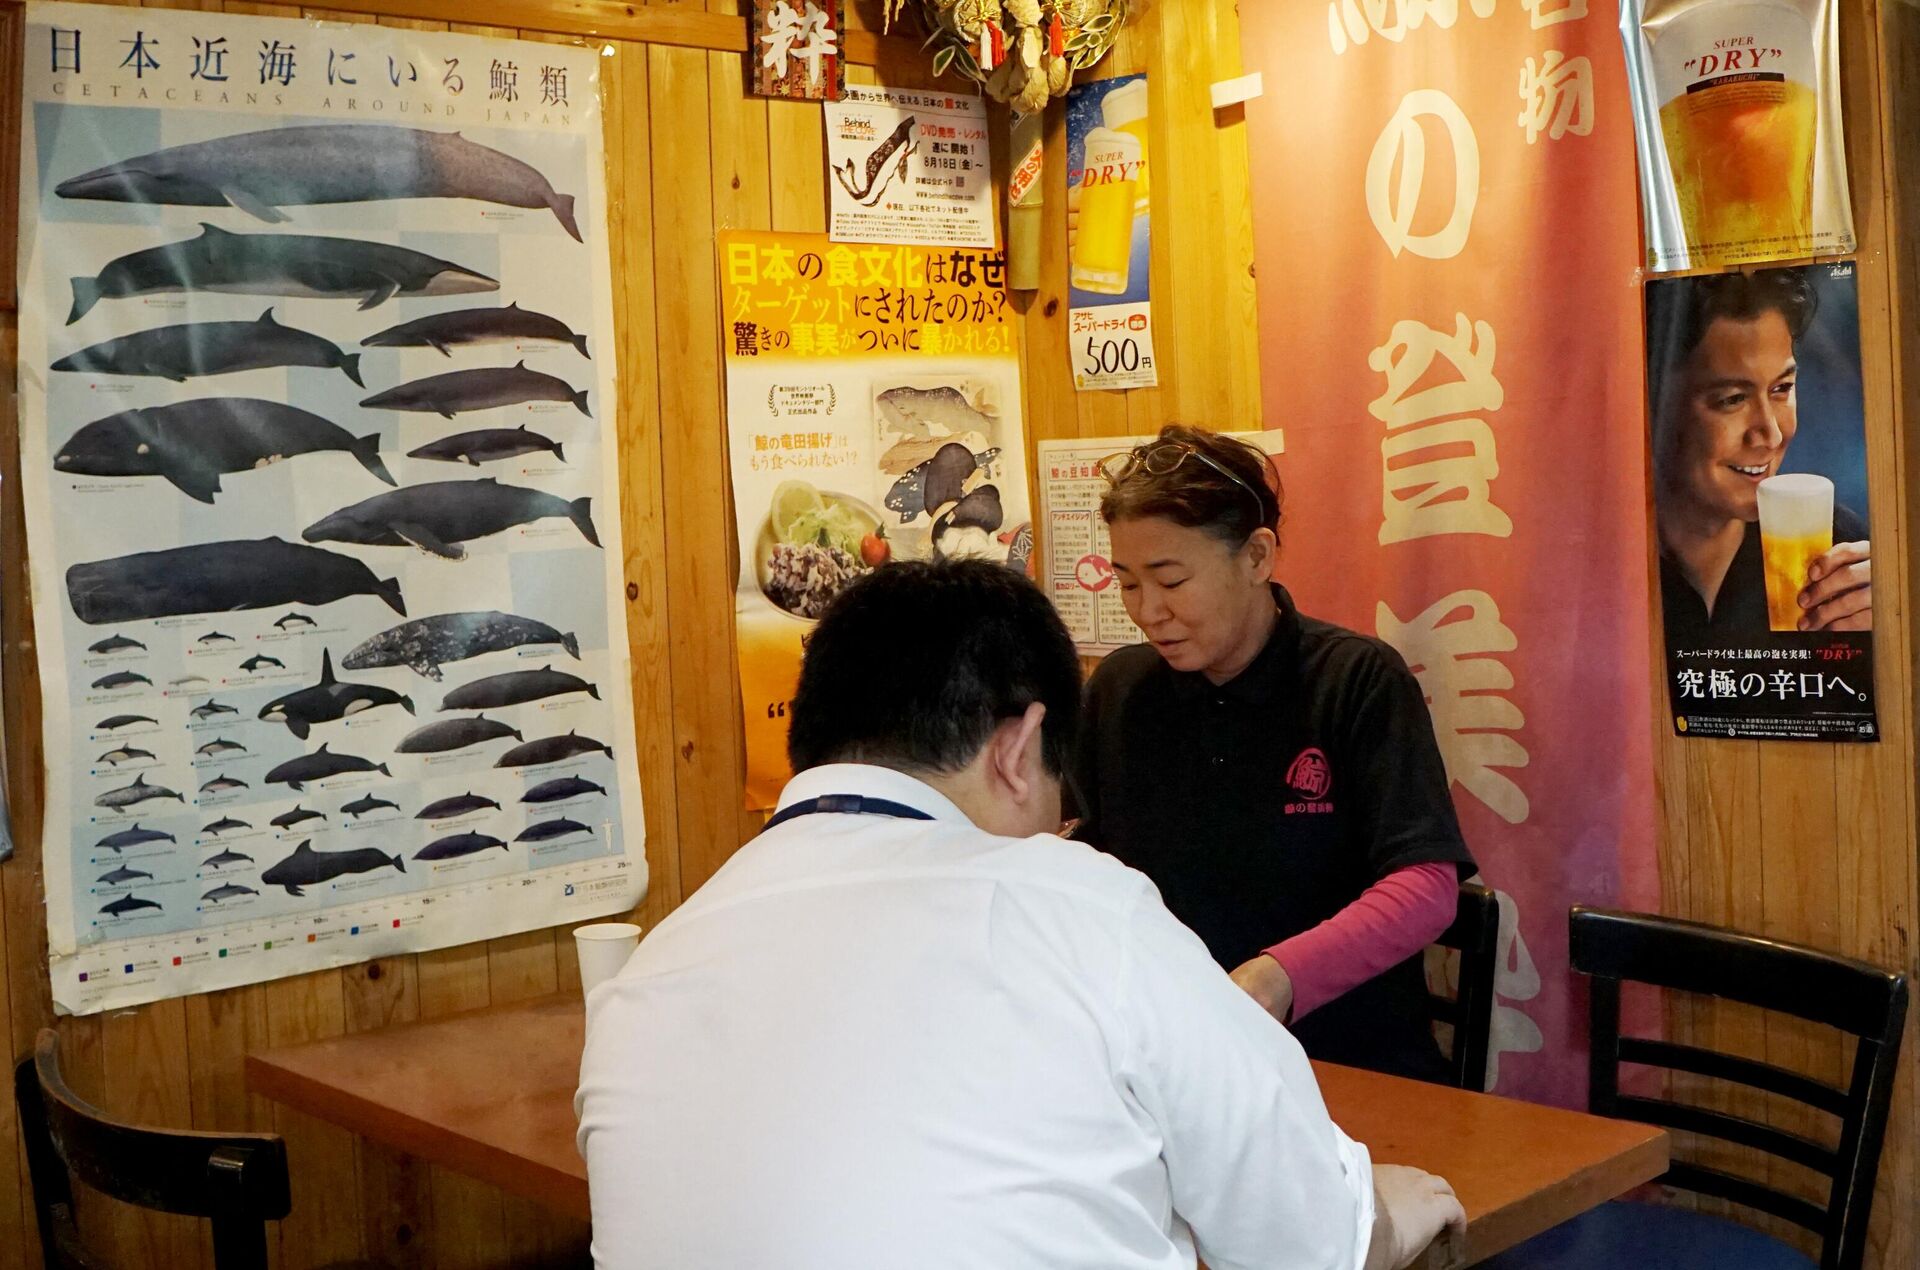 This July 2, 2019 picture shows Tsukiji's whale meat restaurant Tomisui manager Sumiko Koizumi (R) talking with whale meat dealer at her restaurant in Tokyo - Sputnik International, 1920, 26.01.2023